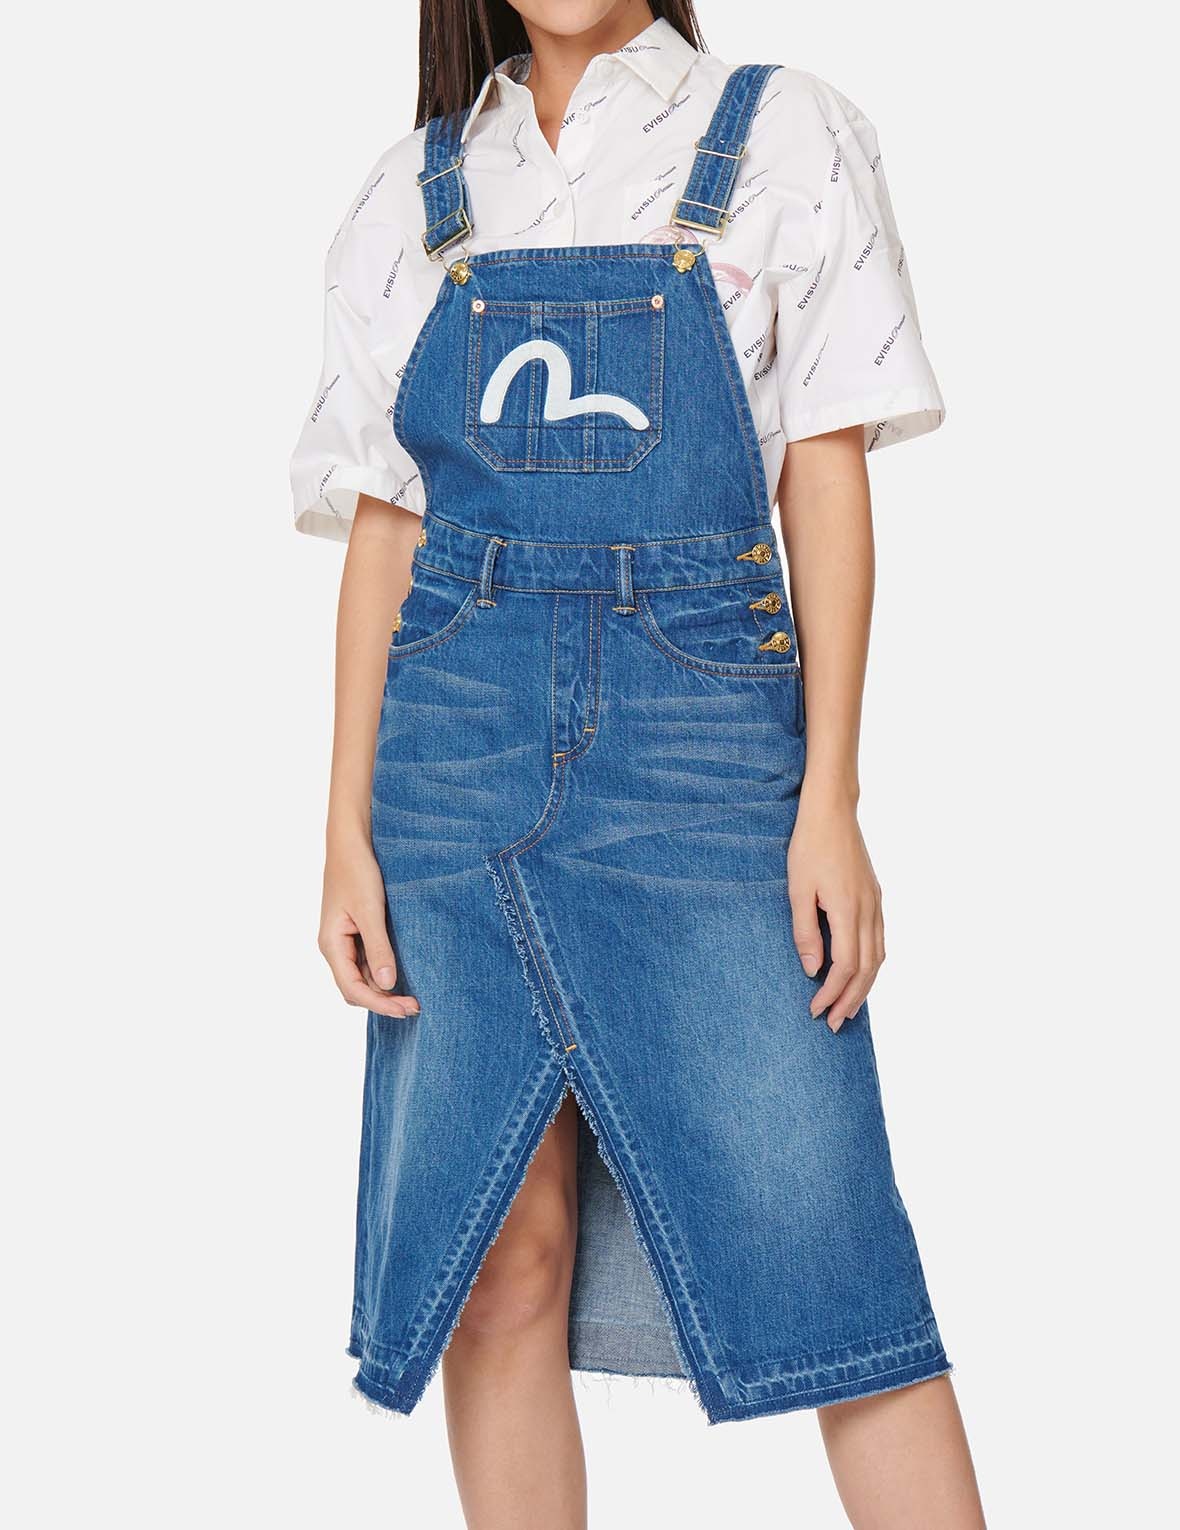 SEAGULL EMBROIDERED DENIM DUNGAREE DRESS - 7